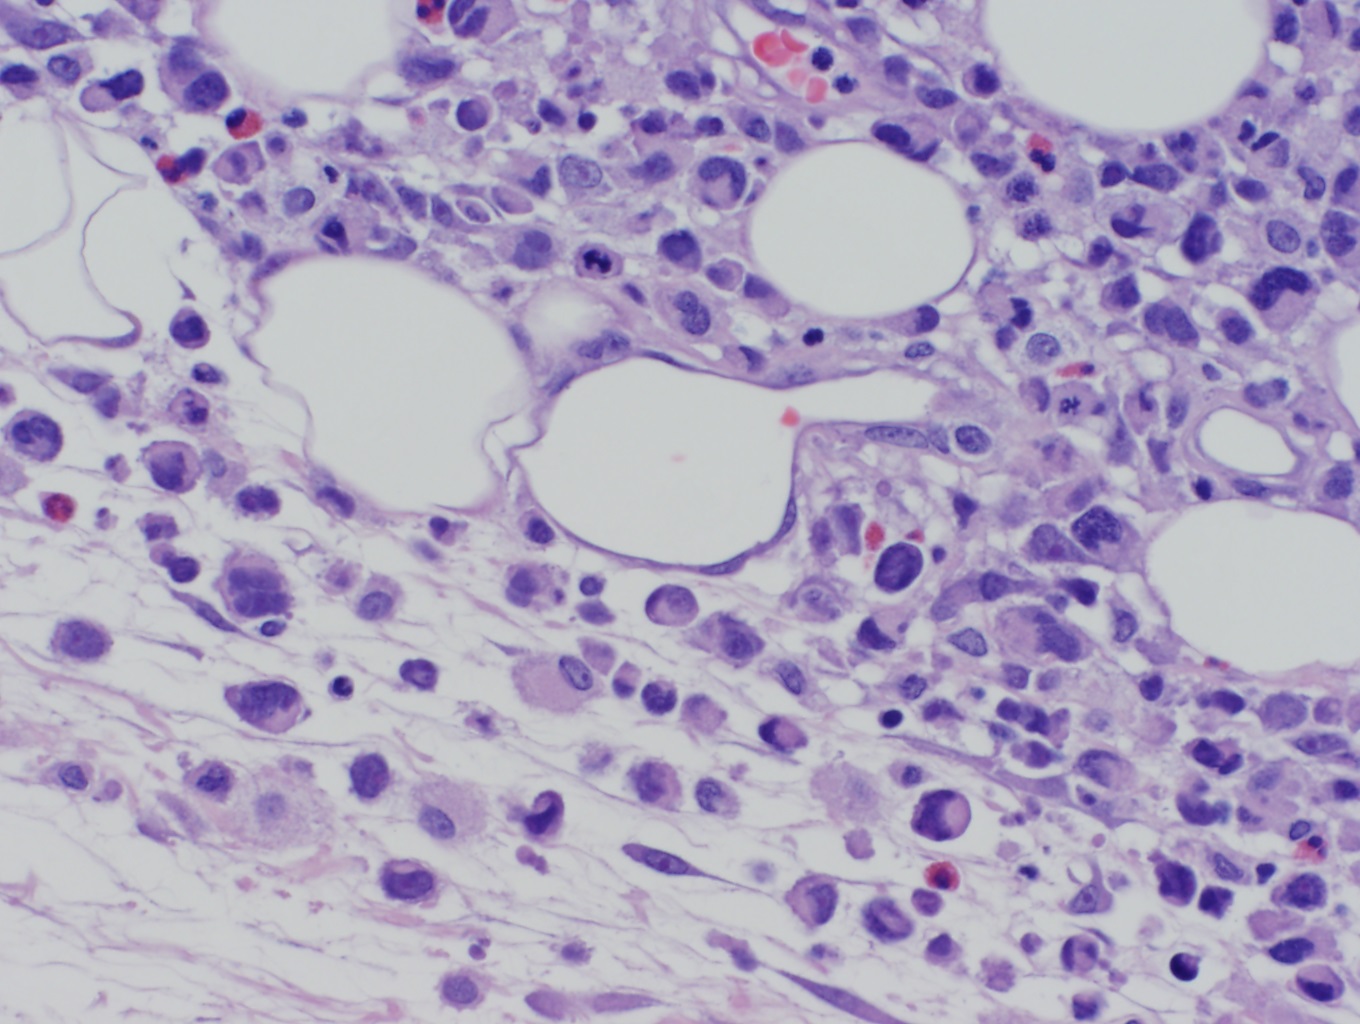 Anaplastic large cell lymphoma